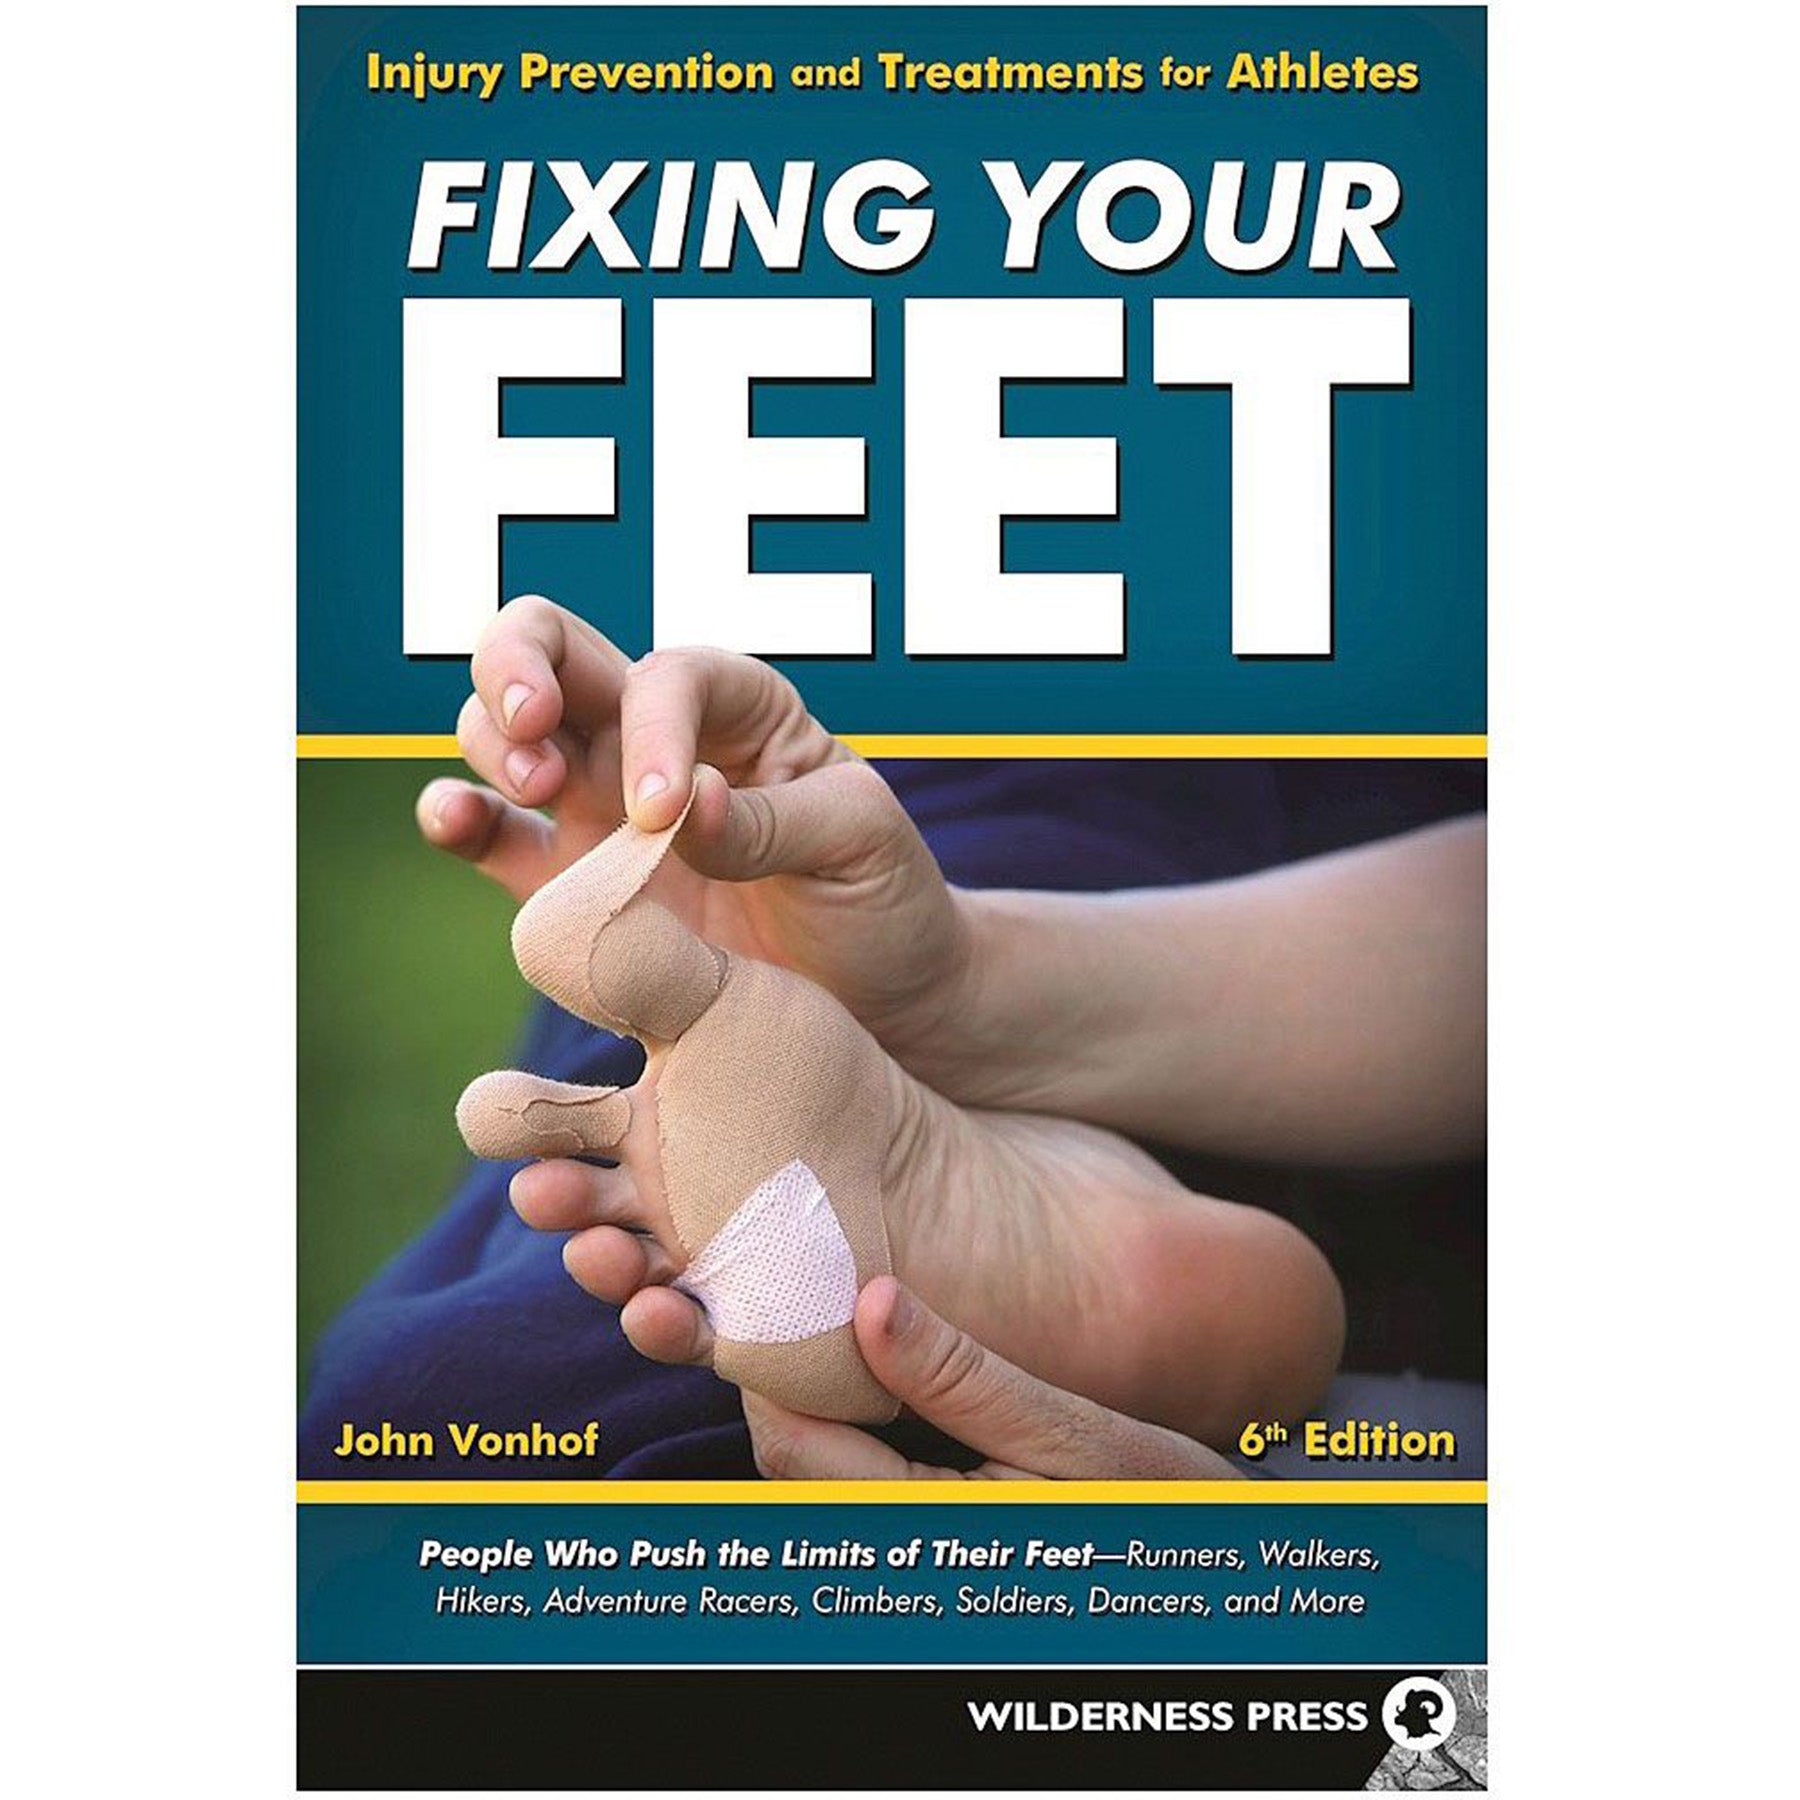 cover photo of the book "fixing your feet"